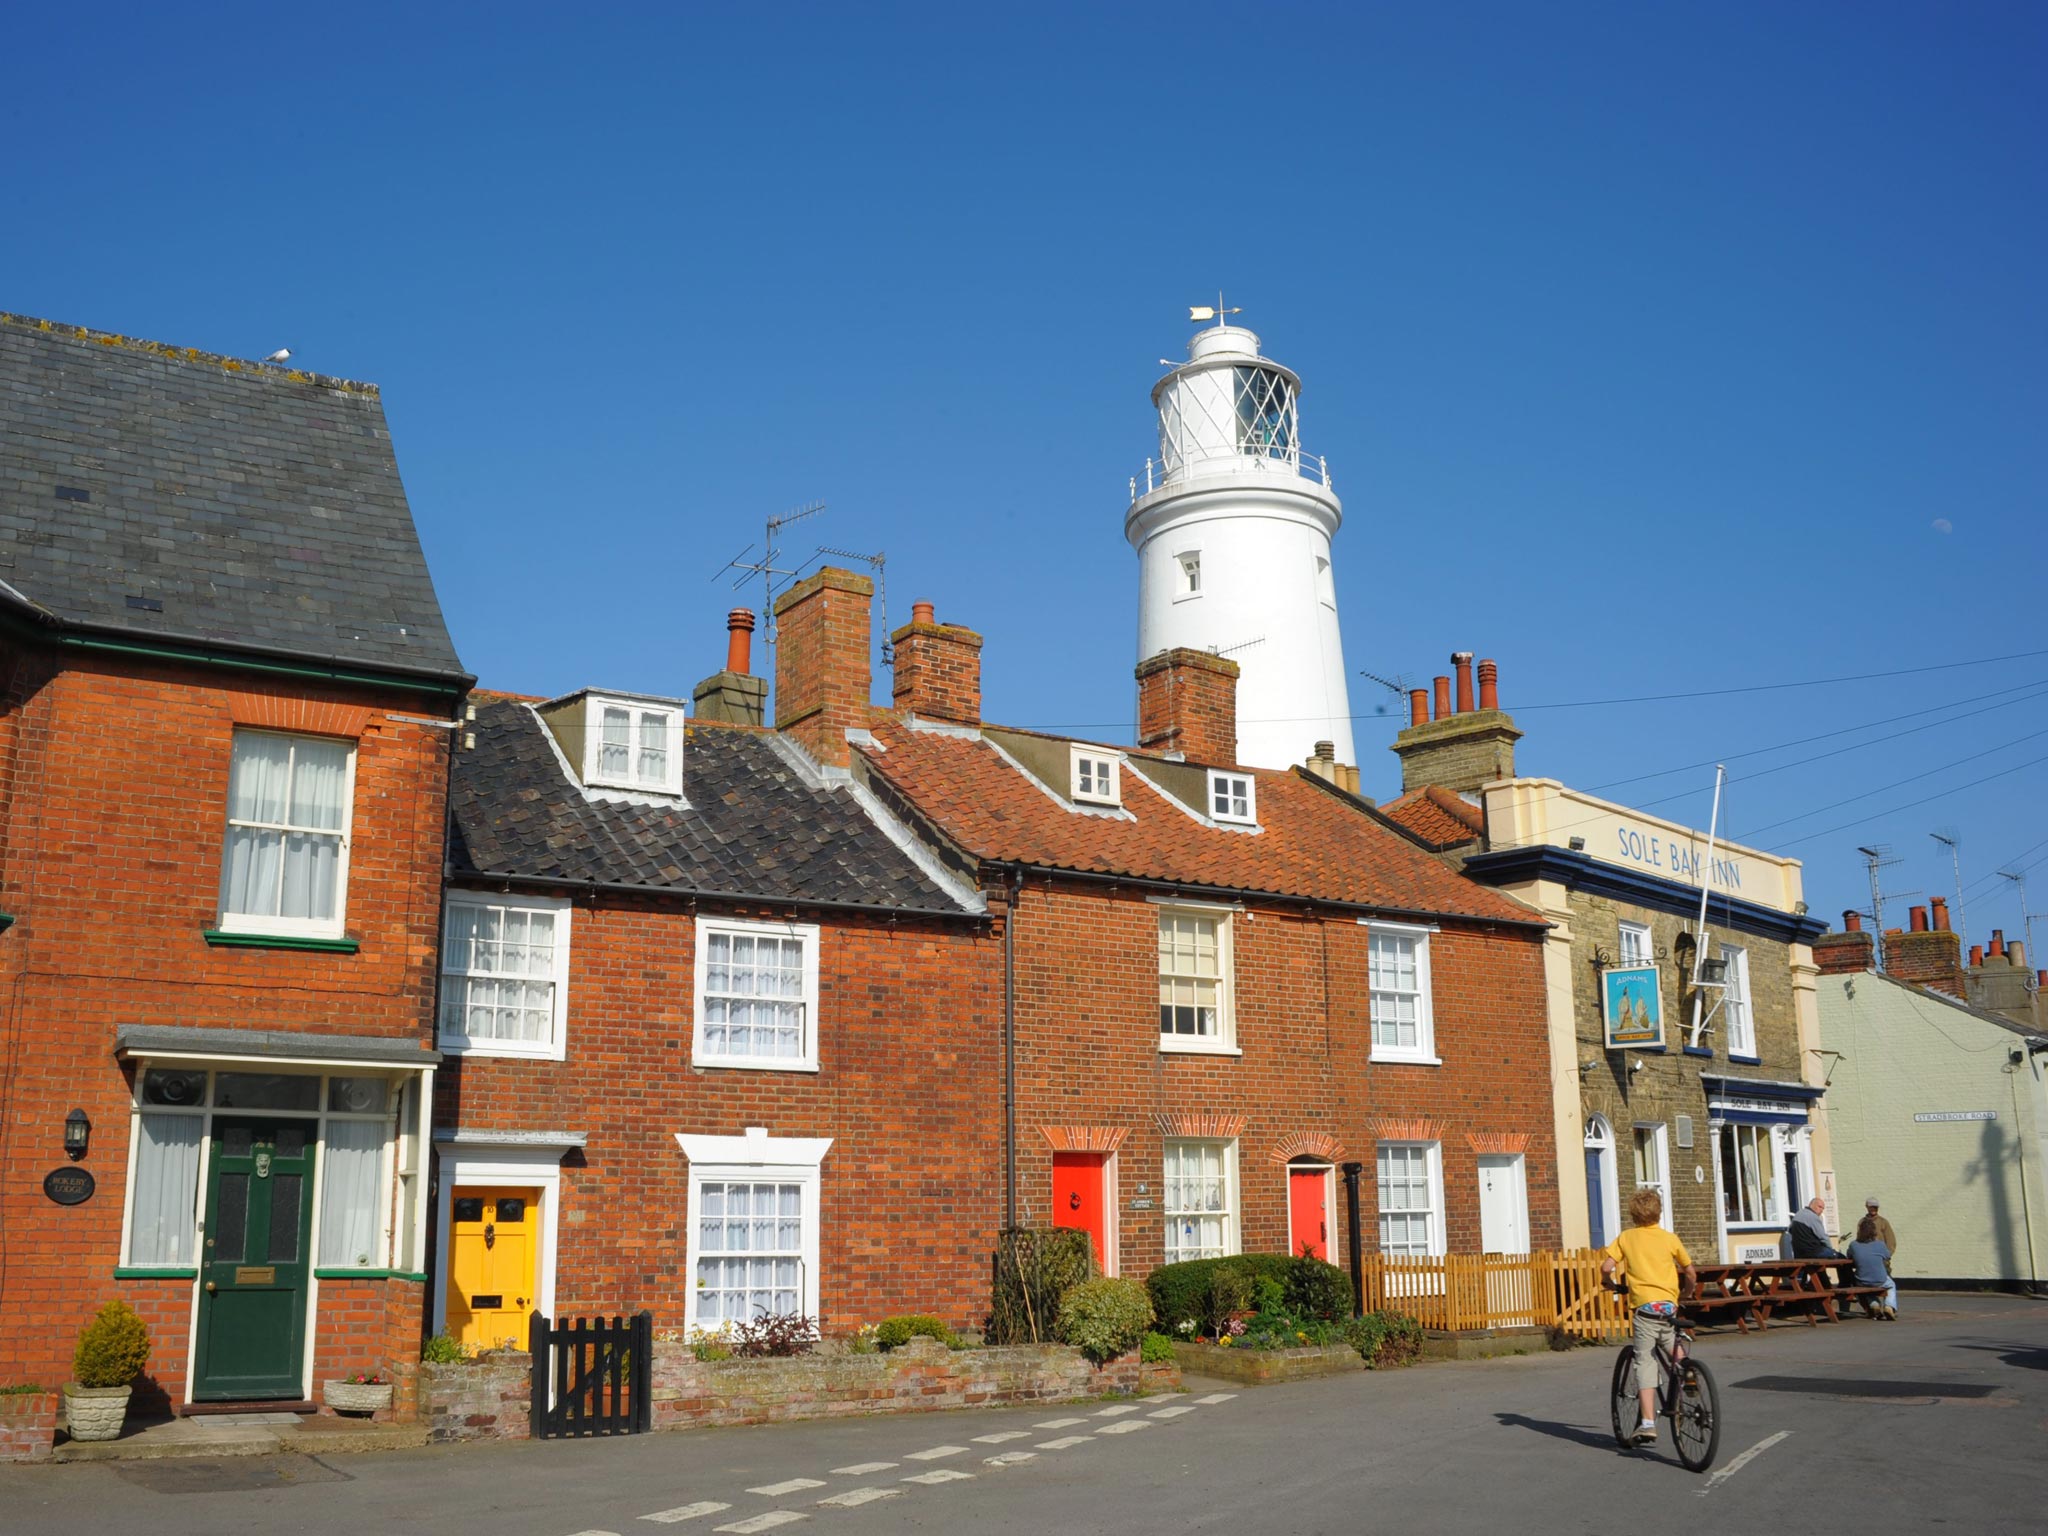 Cottages and the lighthouse in the centre of Southwold,
which has been described as ‘Kensington-on-sea’